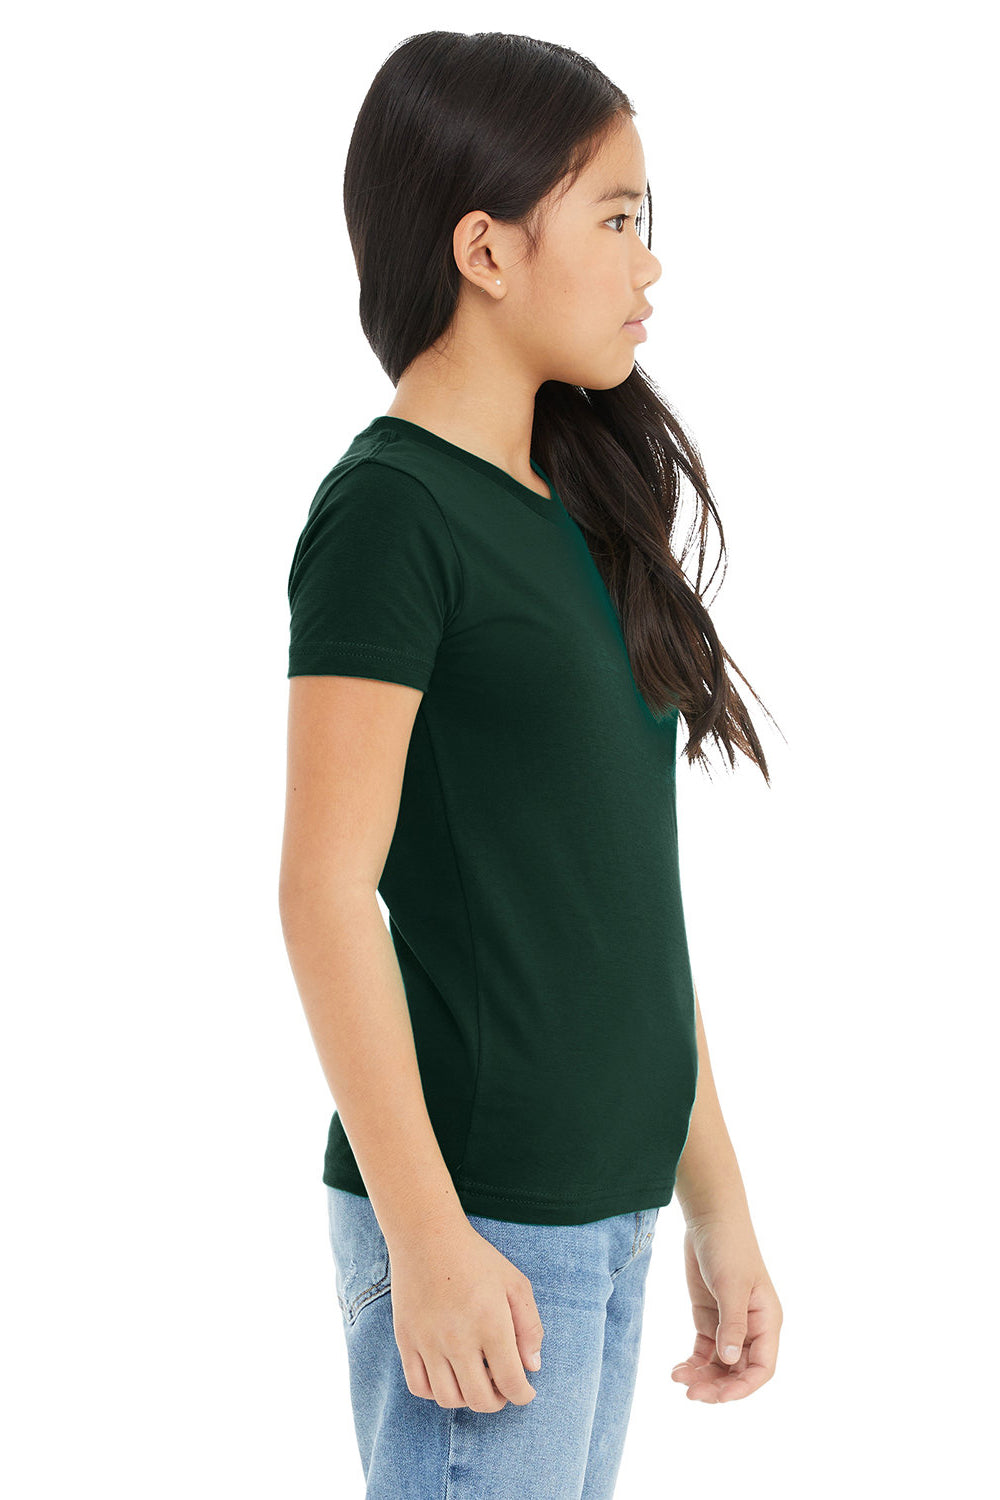 Bella + Canvas 3001Y Youth Jersey Short Sleeve Crewneck T-Shirt Forest Green Model Side